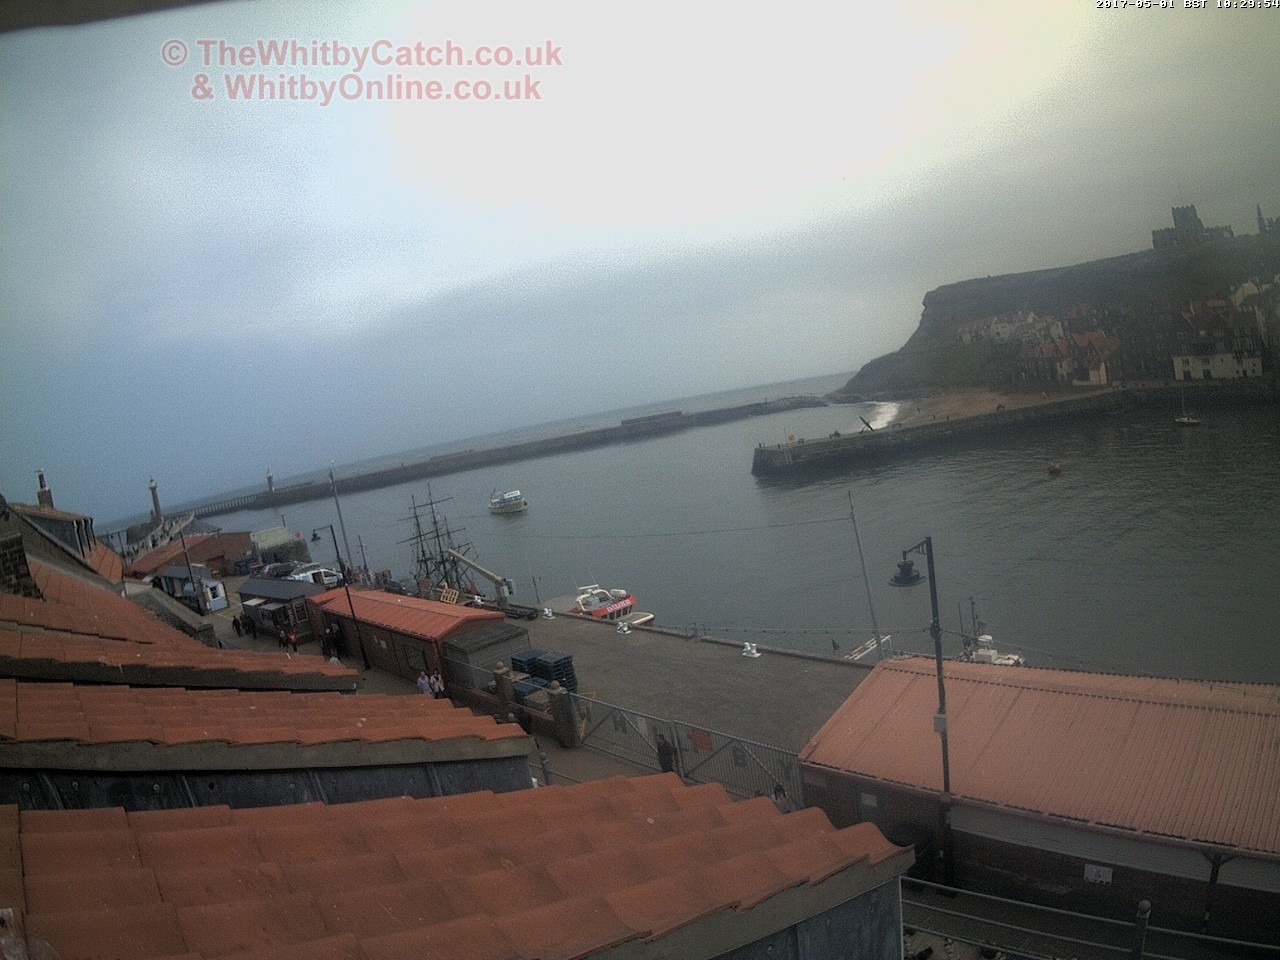 Whitby Mon 1st May 2017 10:30.